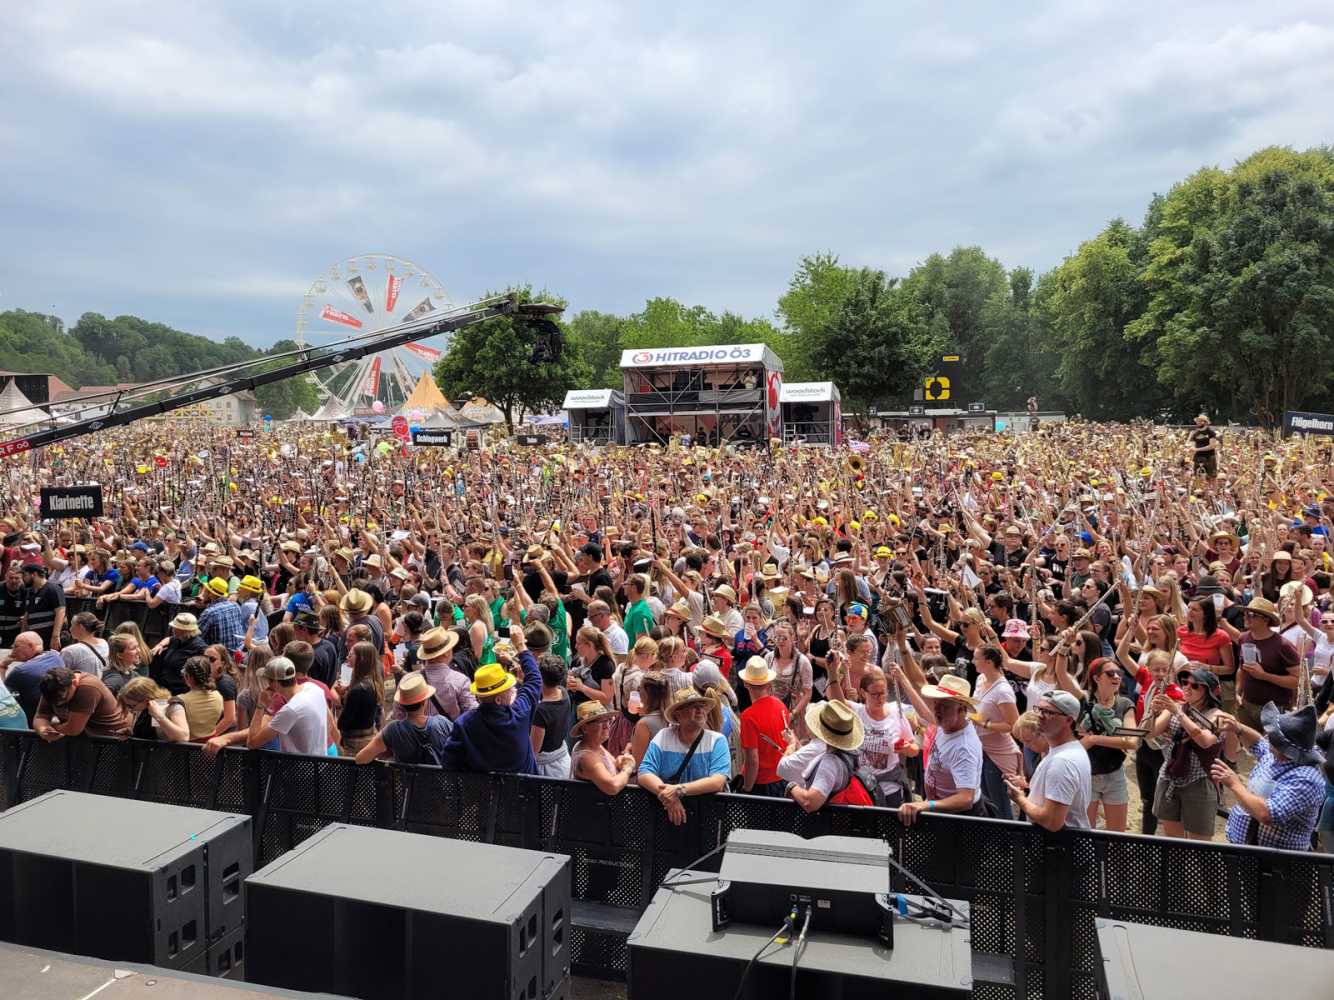 The four-day extravaganza in late June welcomes over 80,000 music enthusiasts